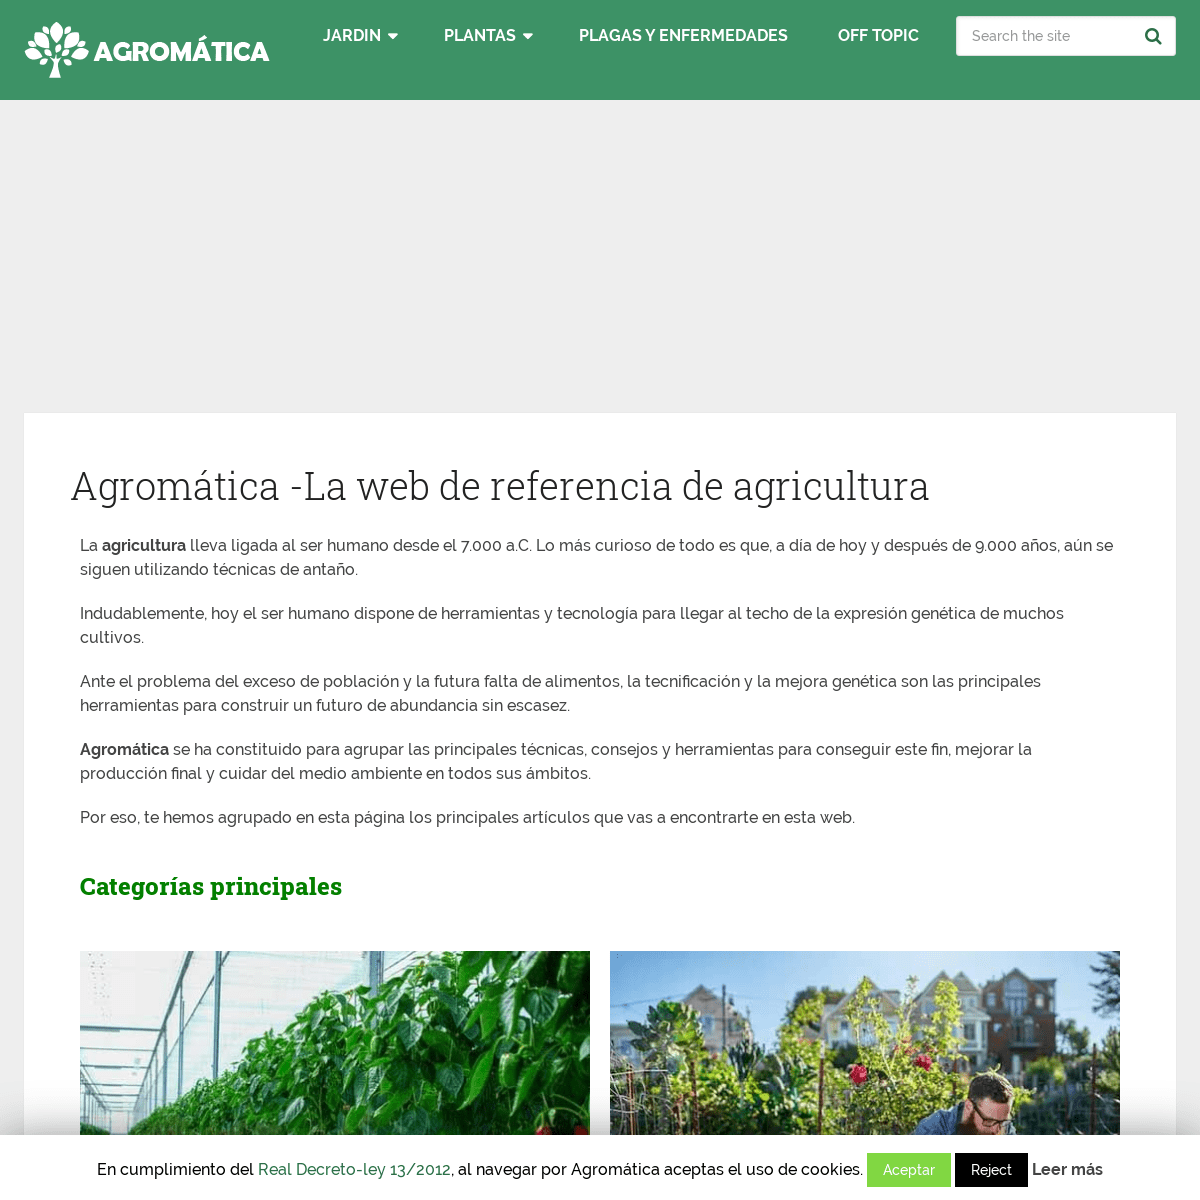 A complete backup of agromatica.es